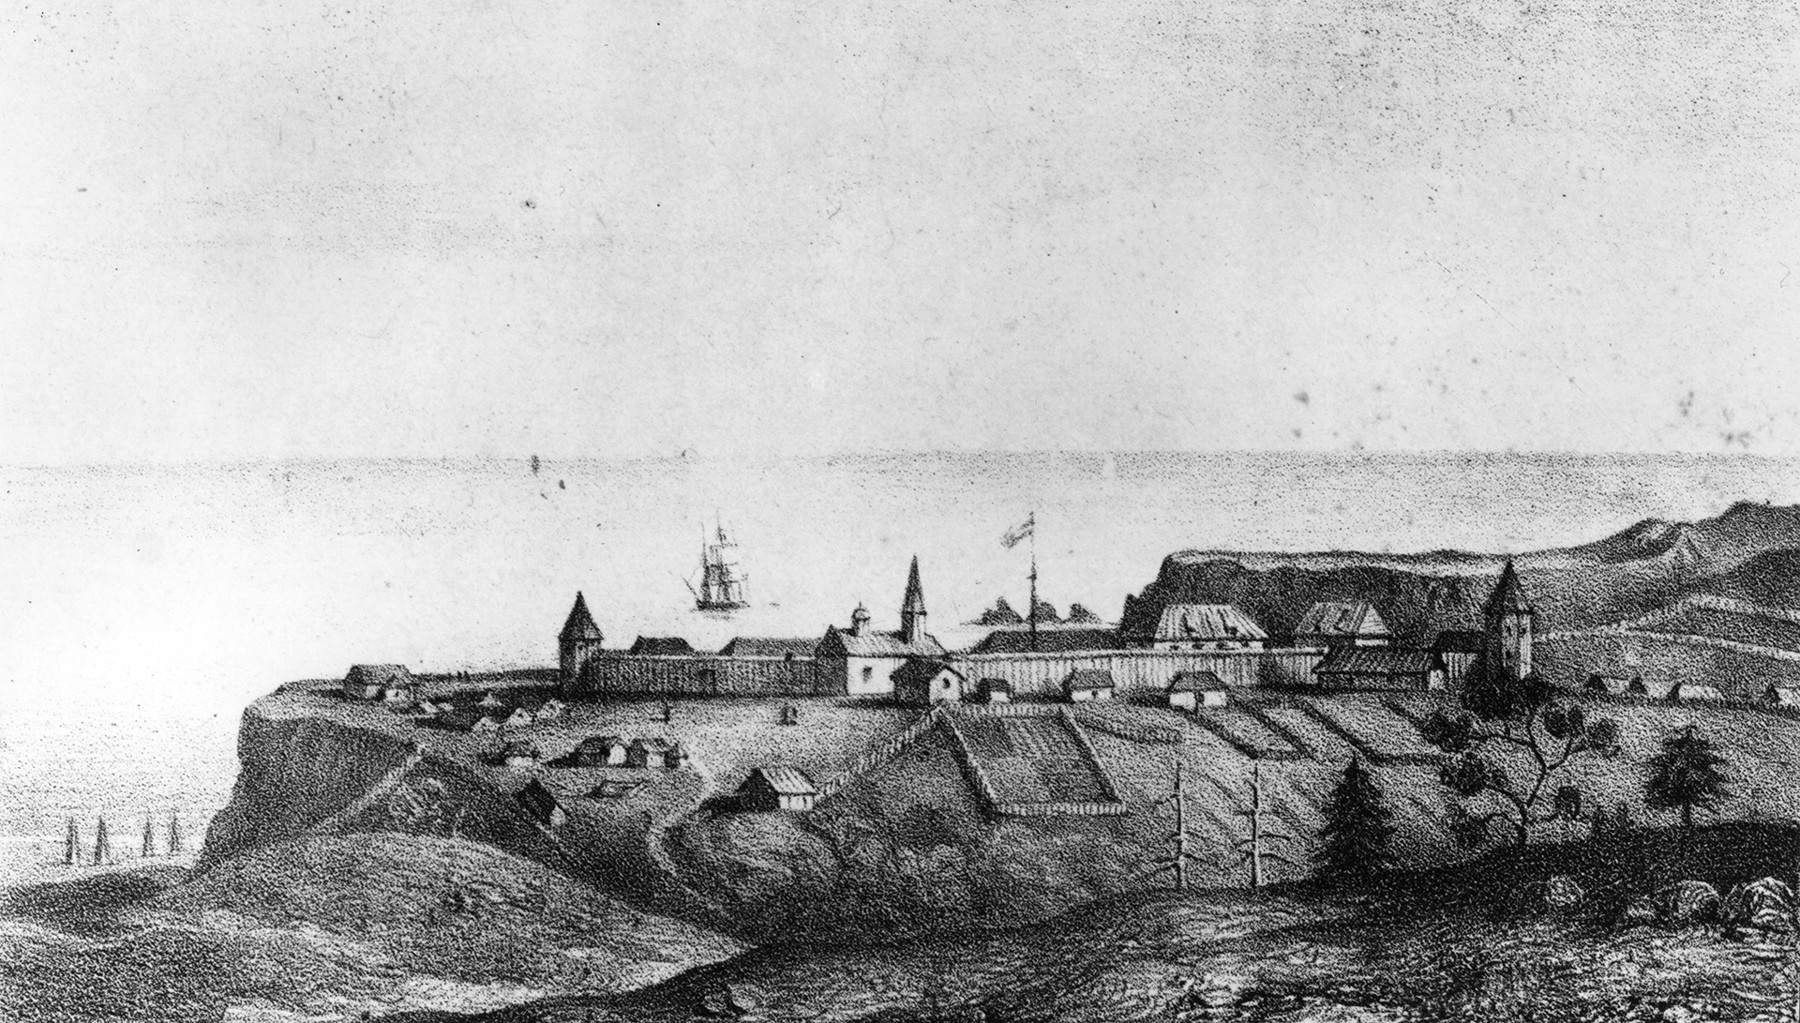 1828: Fort Ross on Bodega Bay, California, founded by Ivan Kuskoff as a post for the Russian-American Company. In 1841 the Russians withdrew, selling the fort to General John A Sutter.